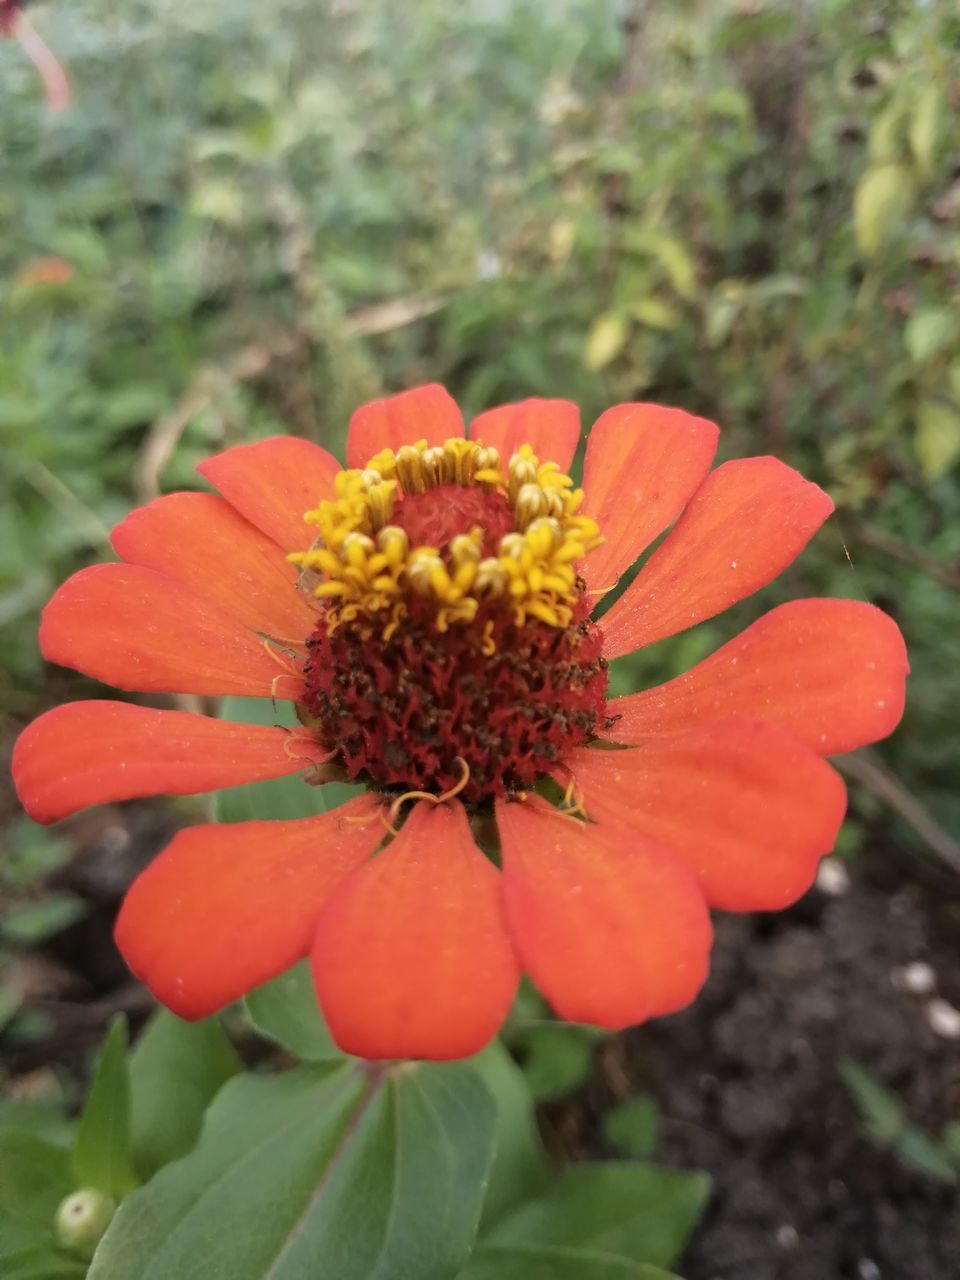 plant, flower, flowering plant, freshness, growth, beauty in nature, close-up, nature, flower head, fragility, petal, inflorescence, wildflower, focus on foreground, no people, day, outdoors, pollen, red, orange color, botany, macro photography, yellow